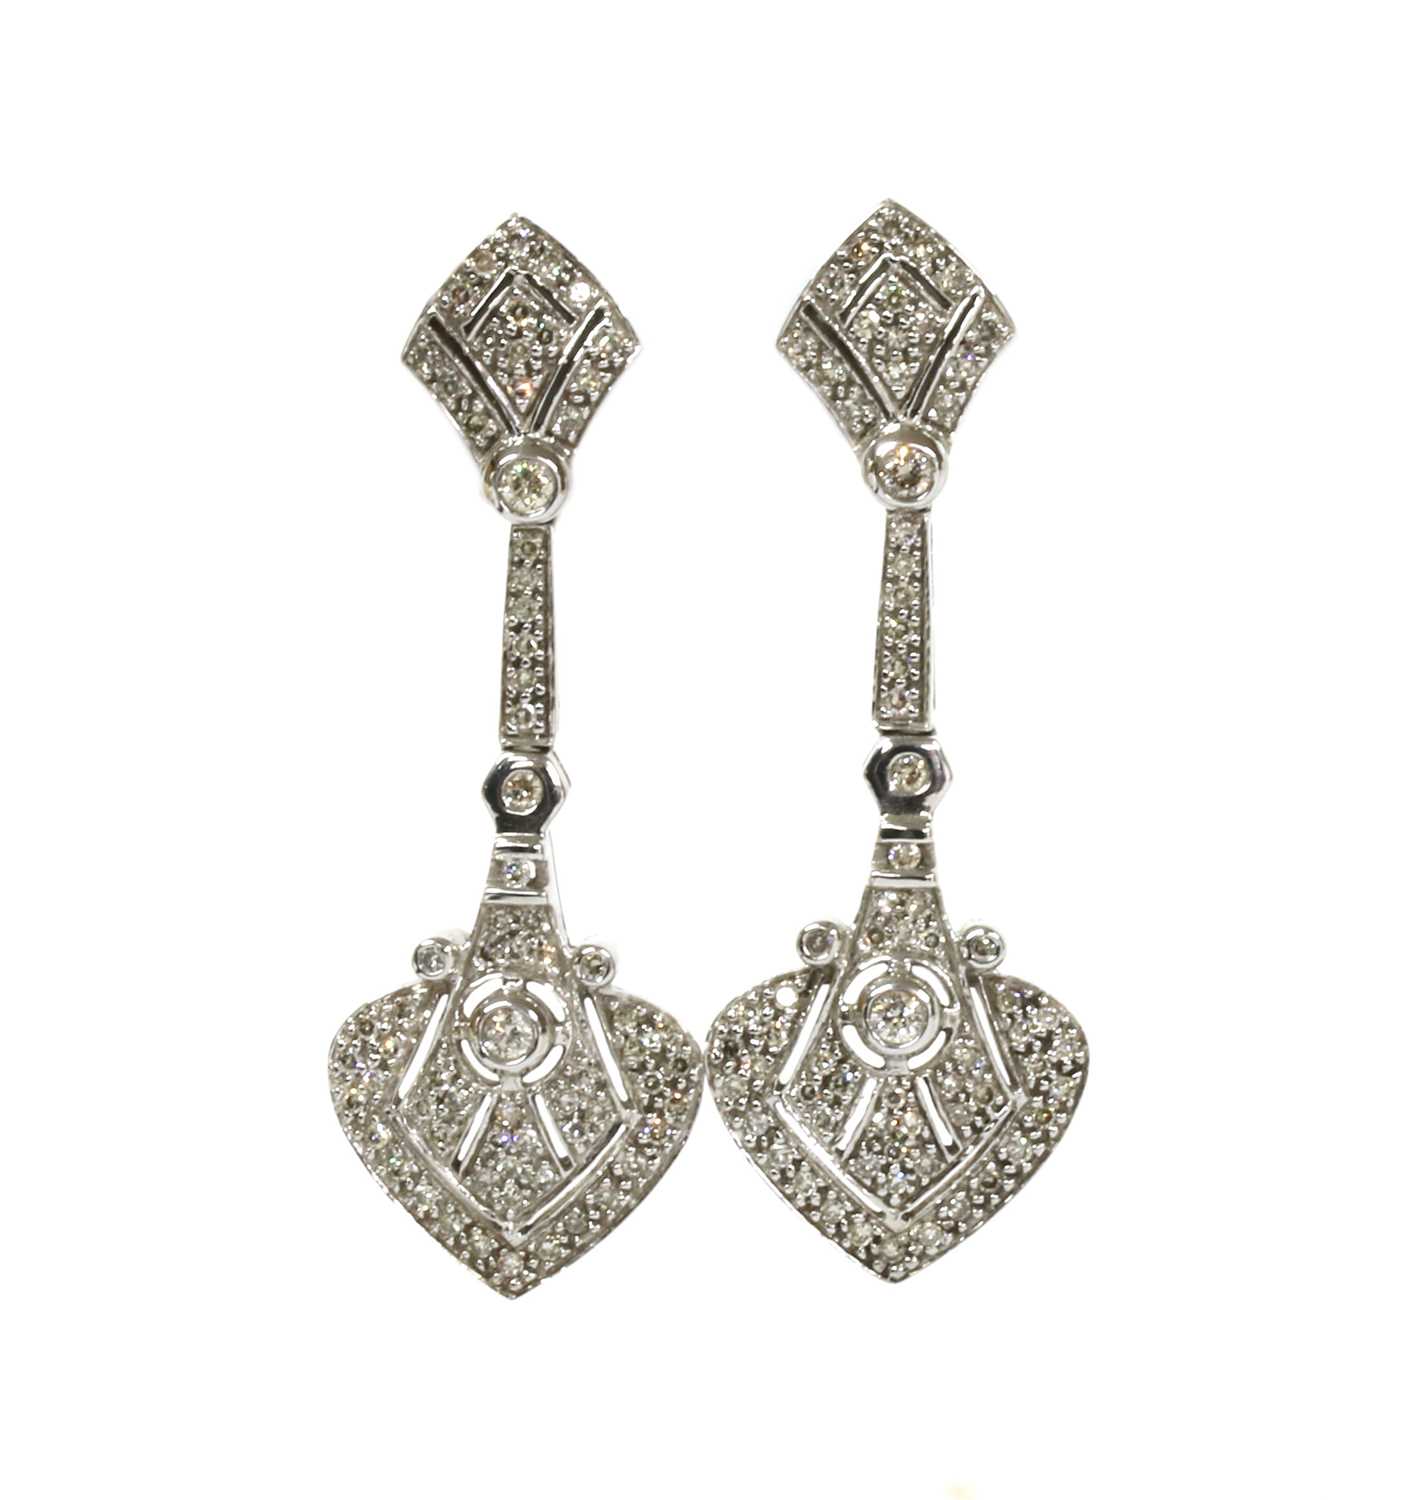 Lot 120 - A pair of Art Deco-style 9ct white gold diamond drop earrings